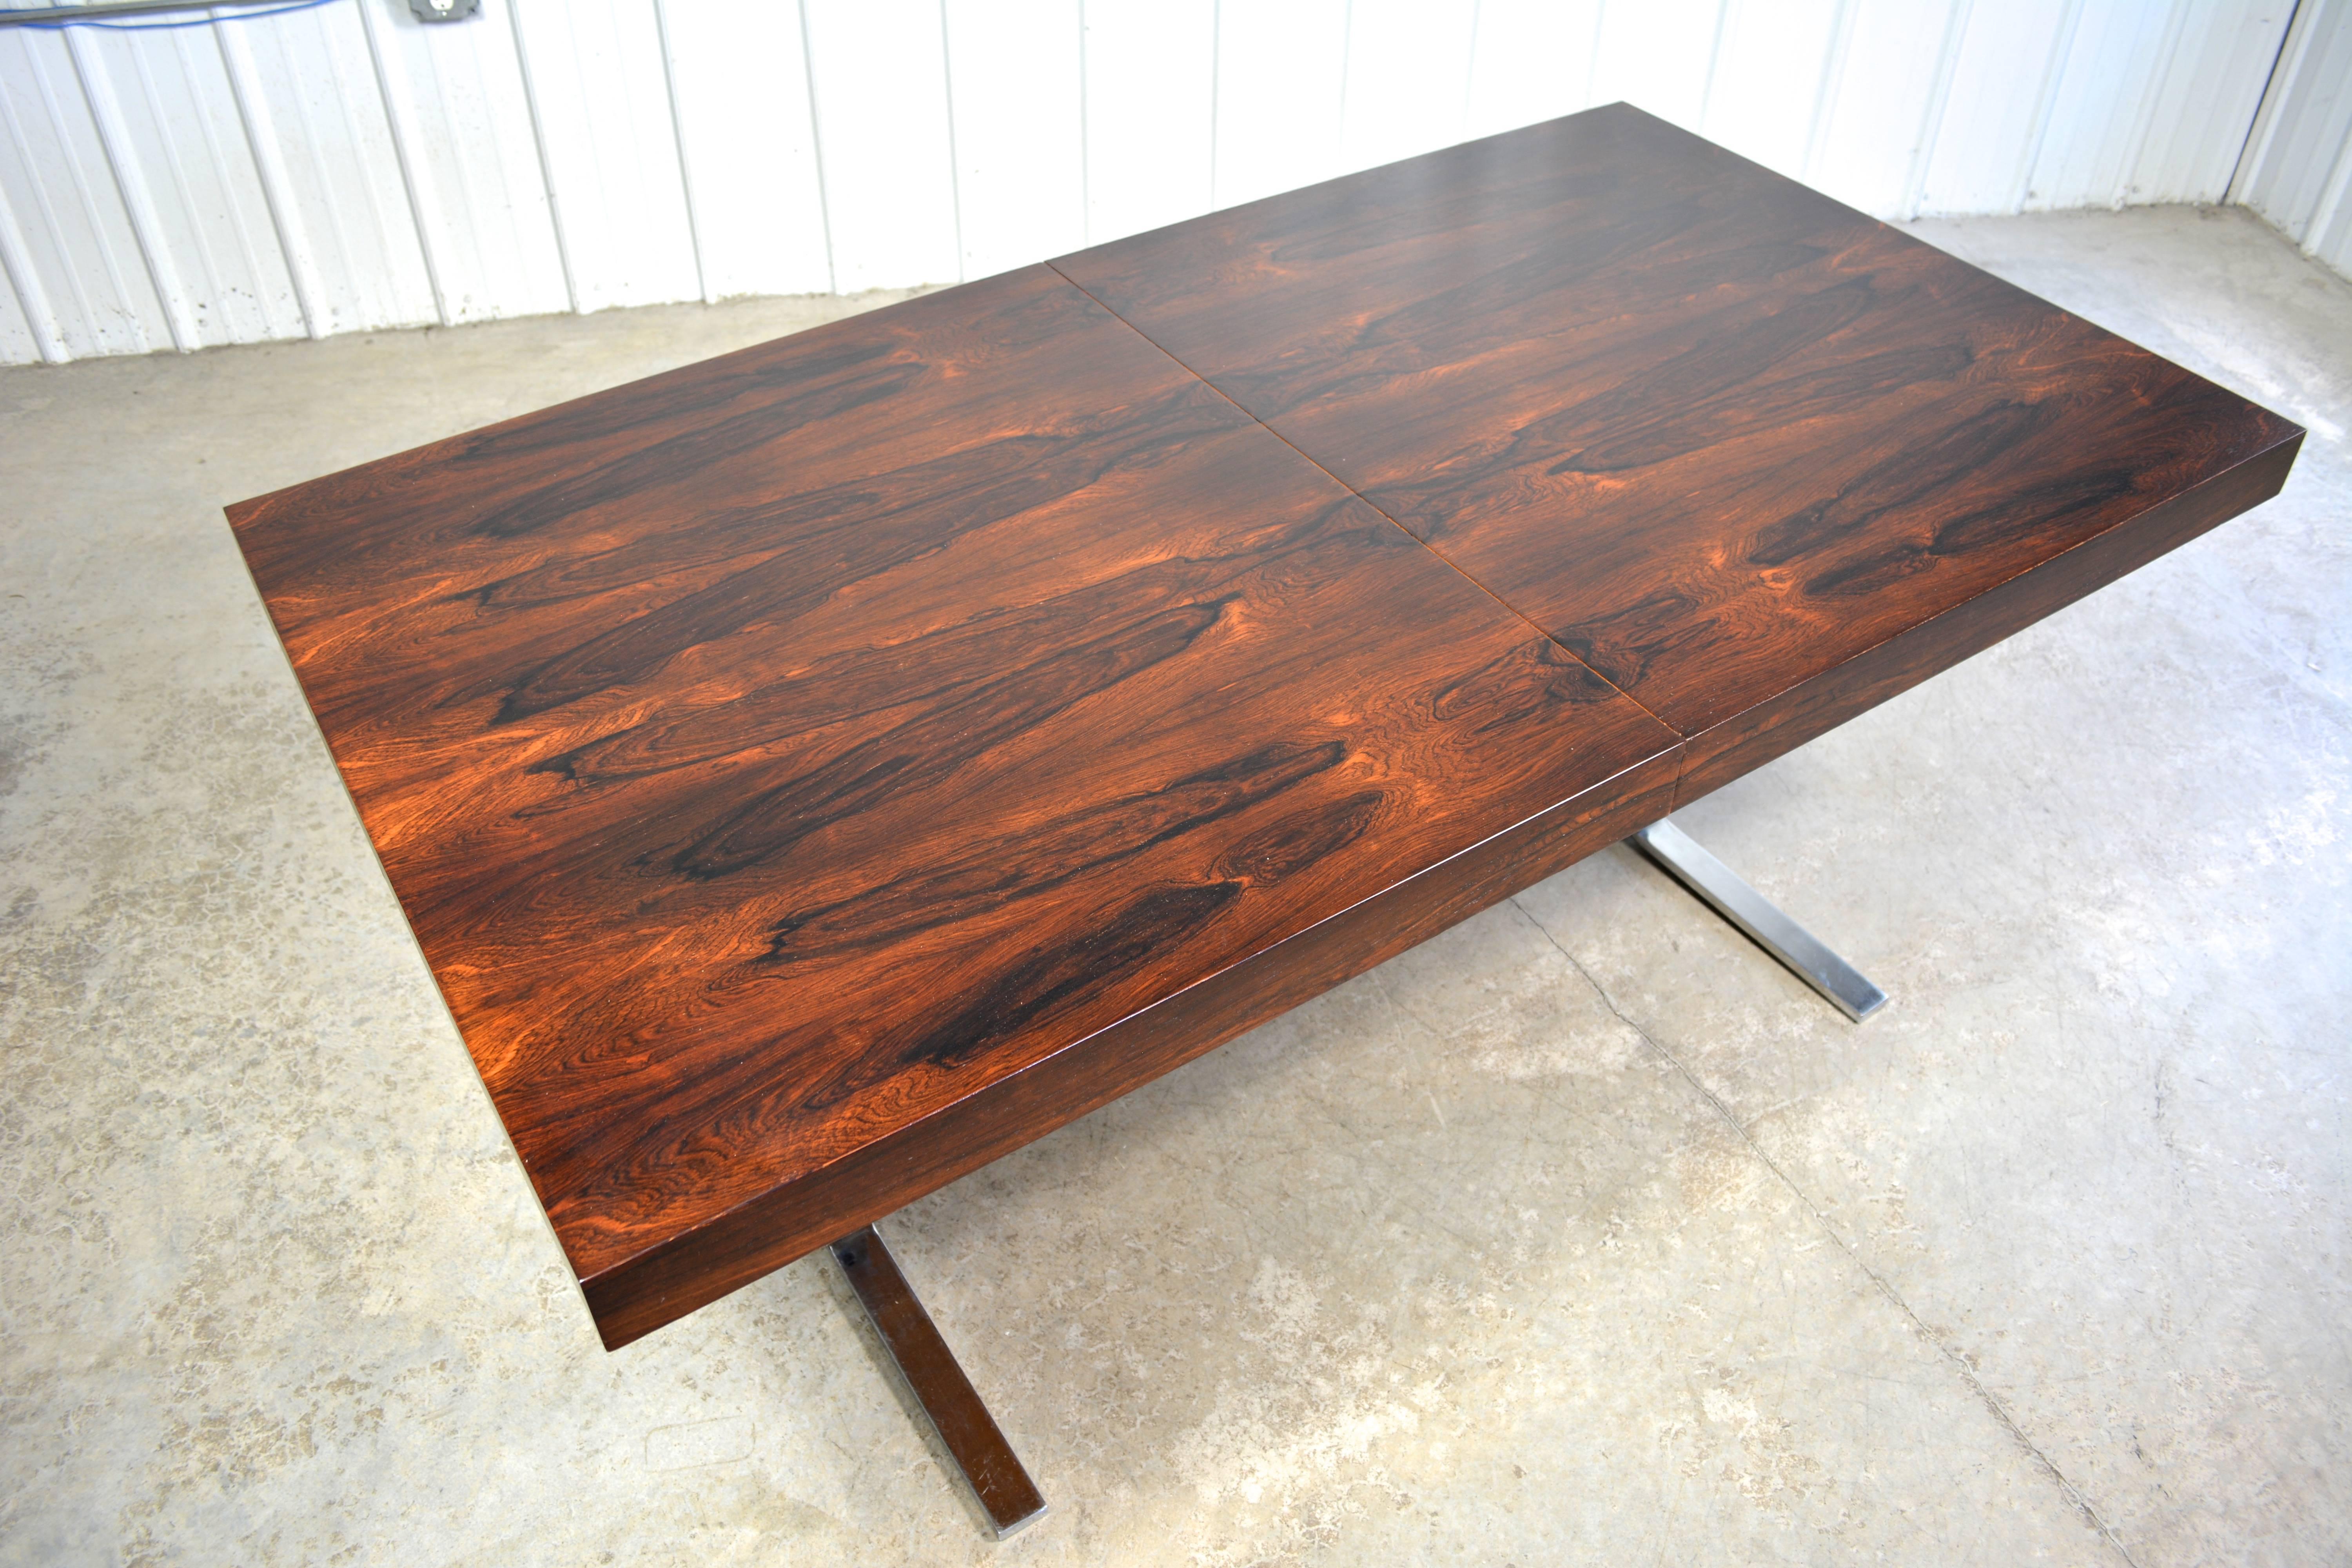 Dining table by Georg Petersens. Heavy chromed steel base. Tabletop has a vibrant rosewood grain. The 23.75" leaf stores under the tabletop.